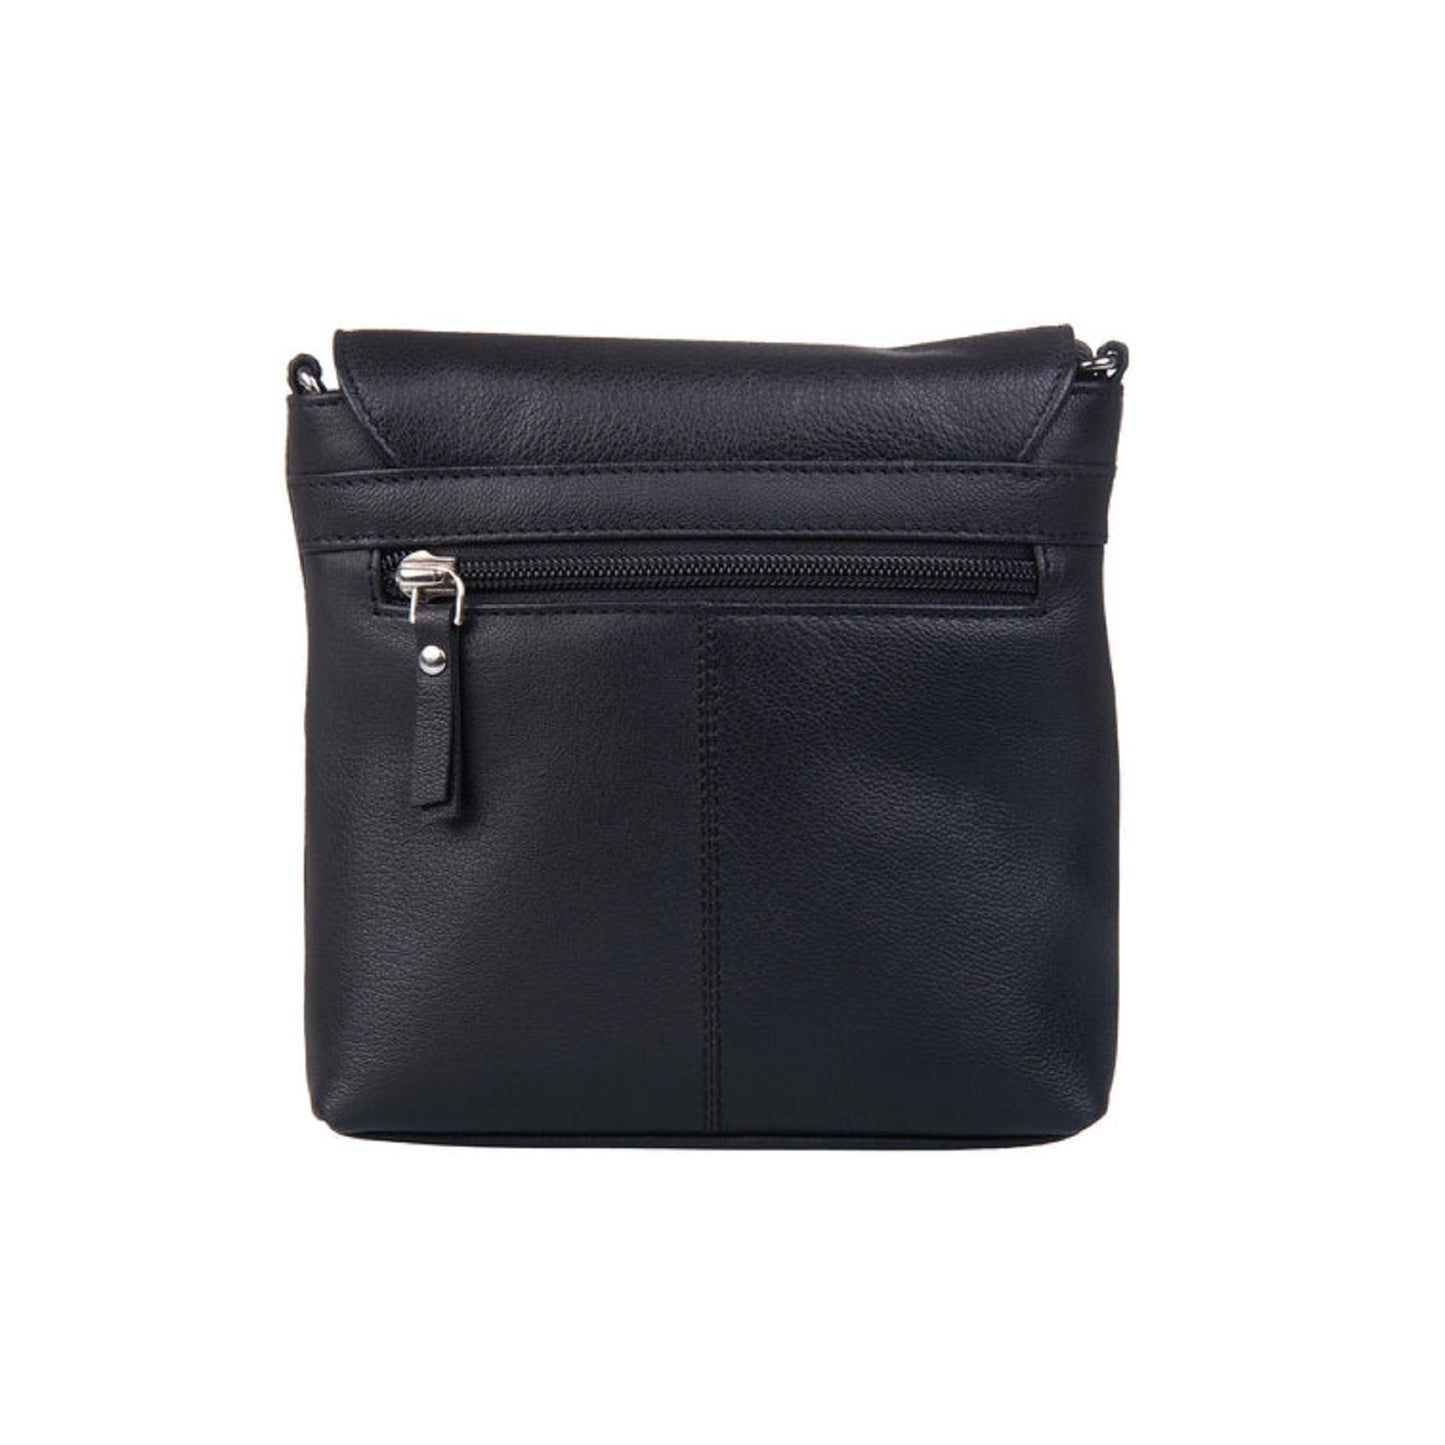 Lucy Small Leather Cross Body - Black